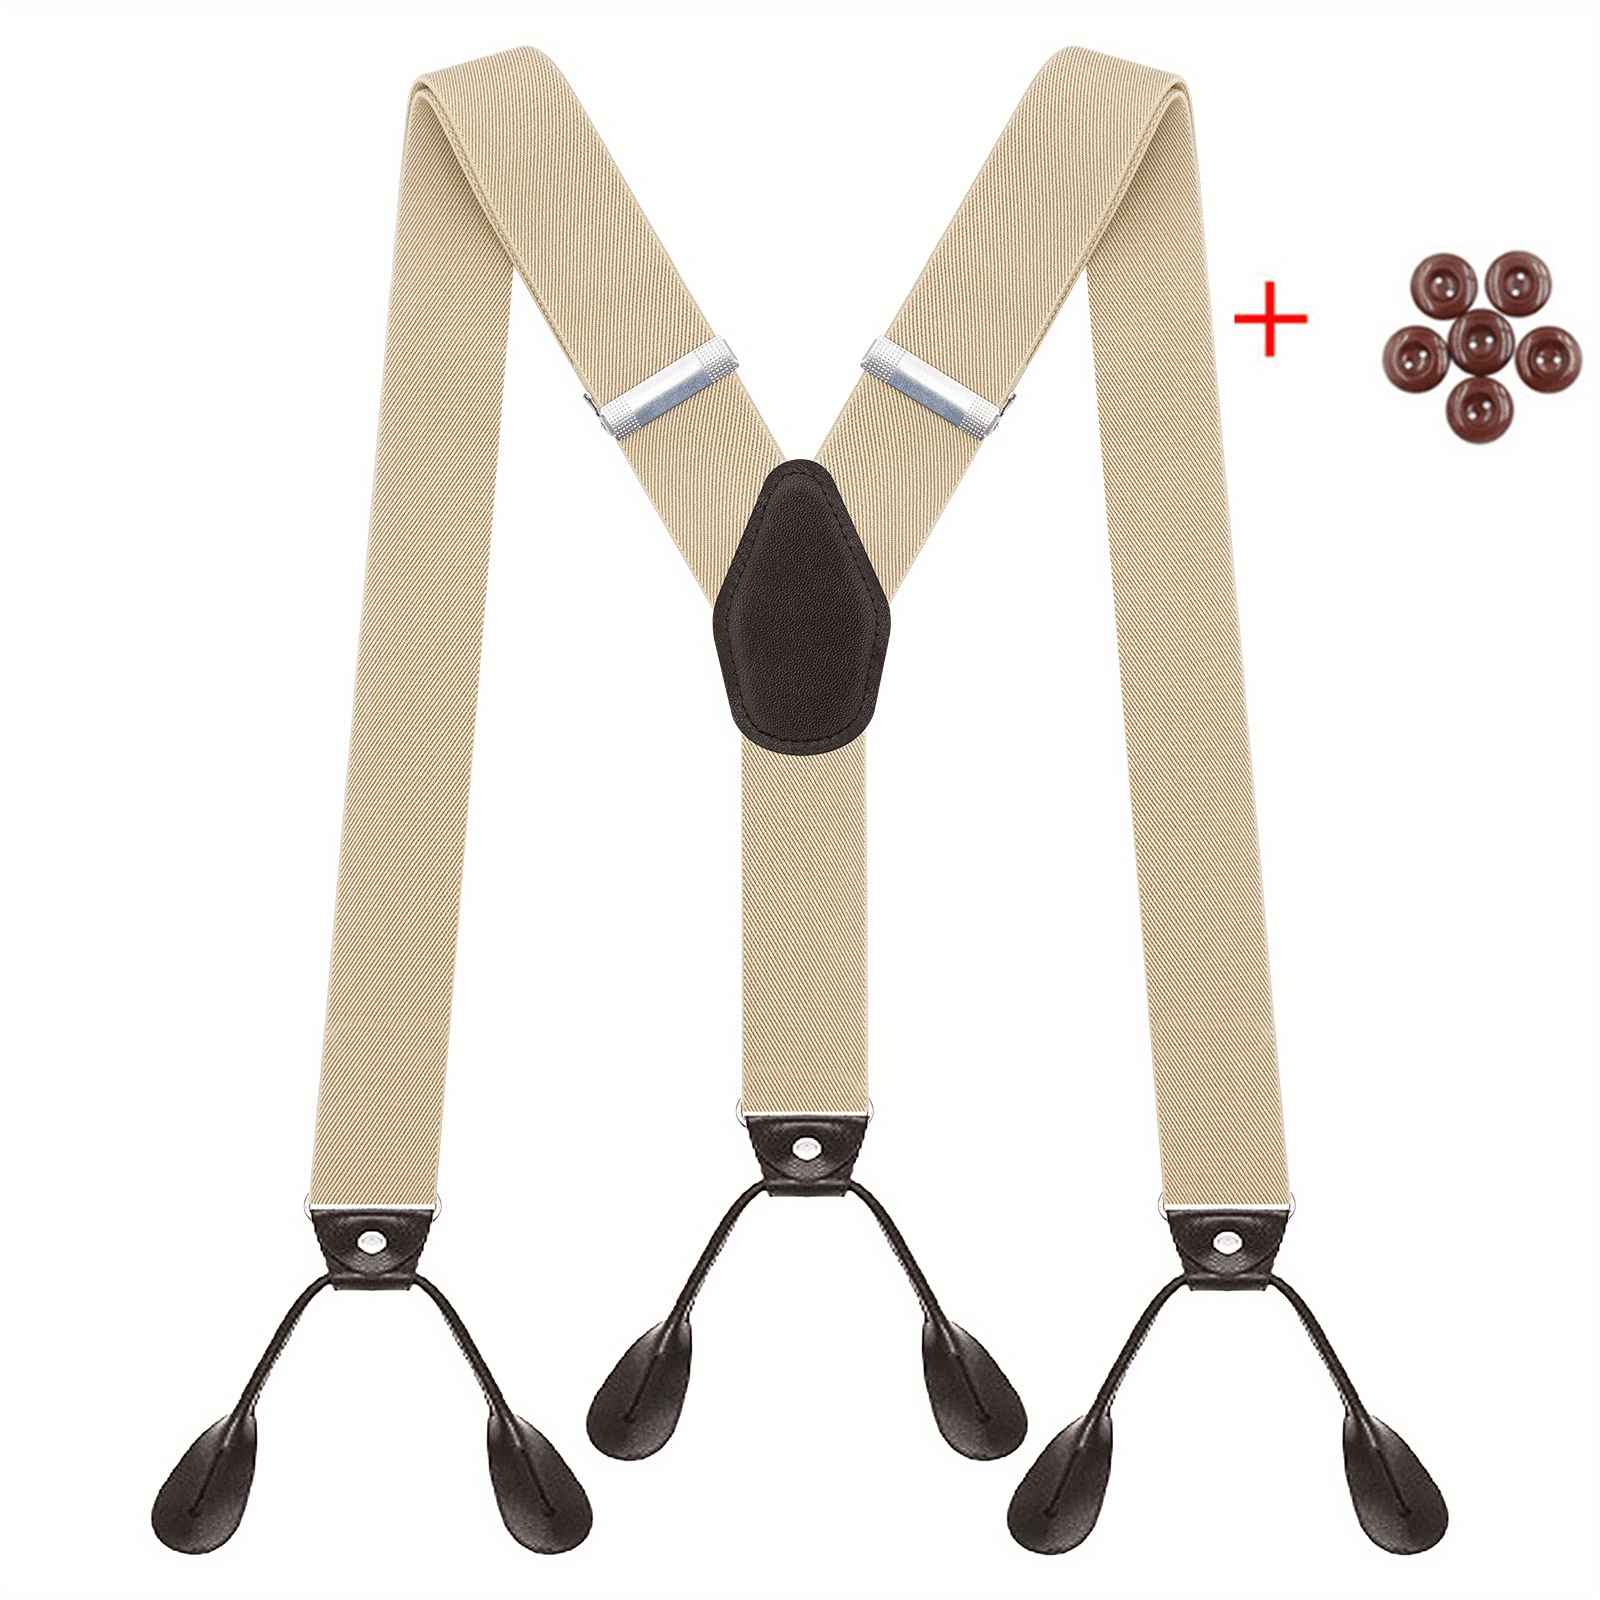 Vintage Paisley Leather Mens Wedding Attire Suspenders Braces For Mens  Wedding Party Tuxedo Y Back, 6 Clips, Heavy Duty Perfect Father Or Husband  Gift From Junglegirl, $26.25